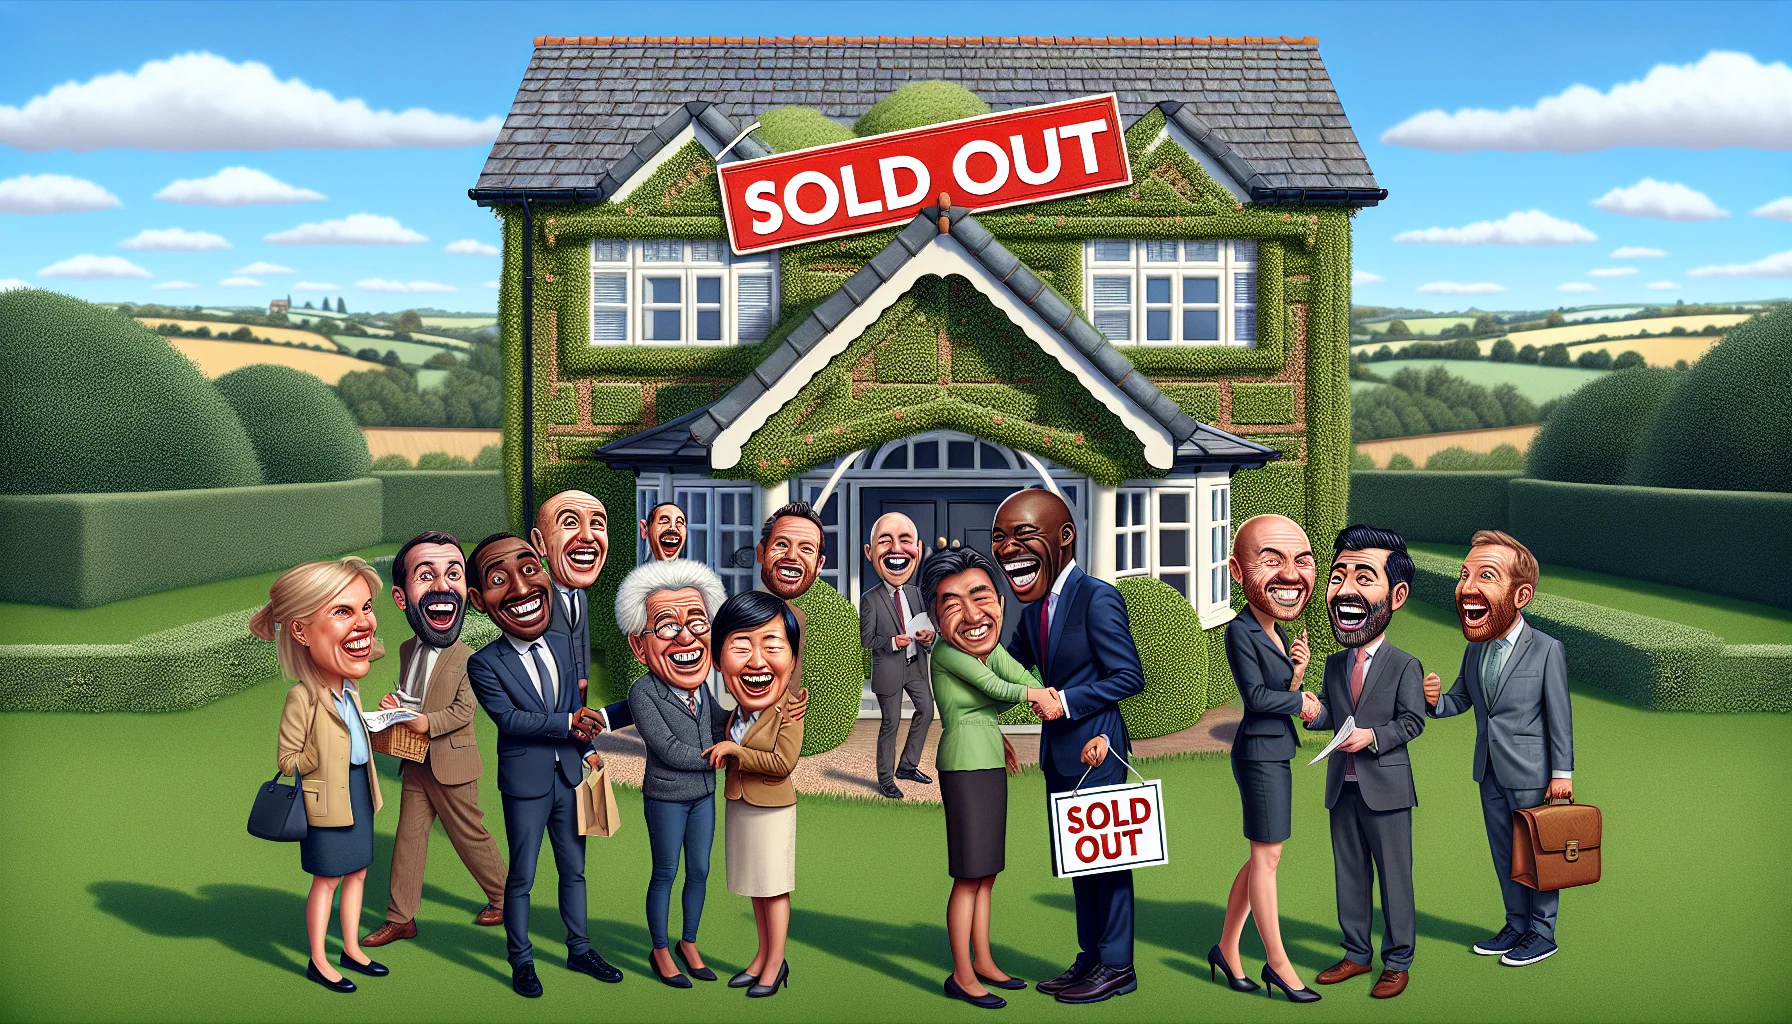 Create a humorous and realistic image of an idyllic real-estate situation. The scene should include a picturesque market house surrounded by lush green lawns and manicured gardens. A 'Sold Out' sign is prominently displayed, hinting at the brisk business being conducted. Buyers and sellers are depicted, laughing and shaking hands, with diverse descents: Caucasian, Hispanic, Black, Middle-Eastern, South Asian. The backdrop is a clear blue sky, suggesting a prosperous and vibrant housing market.